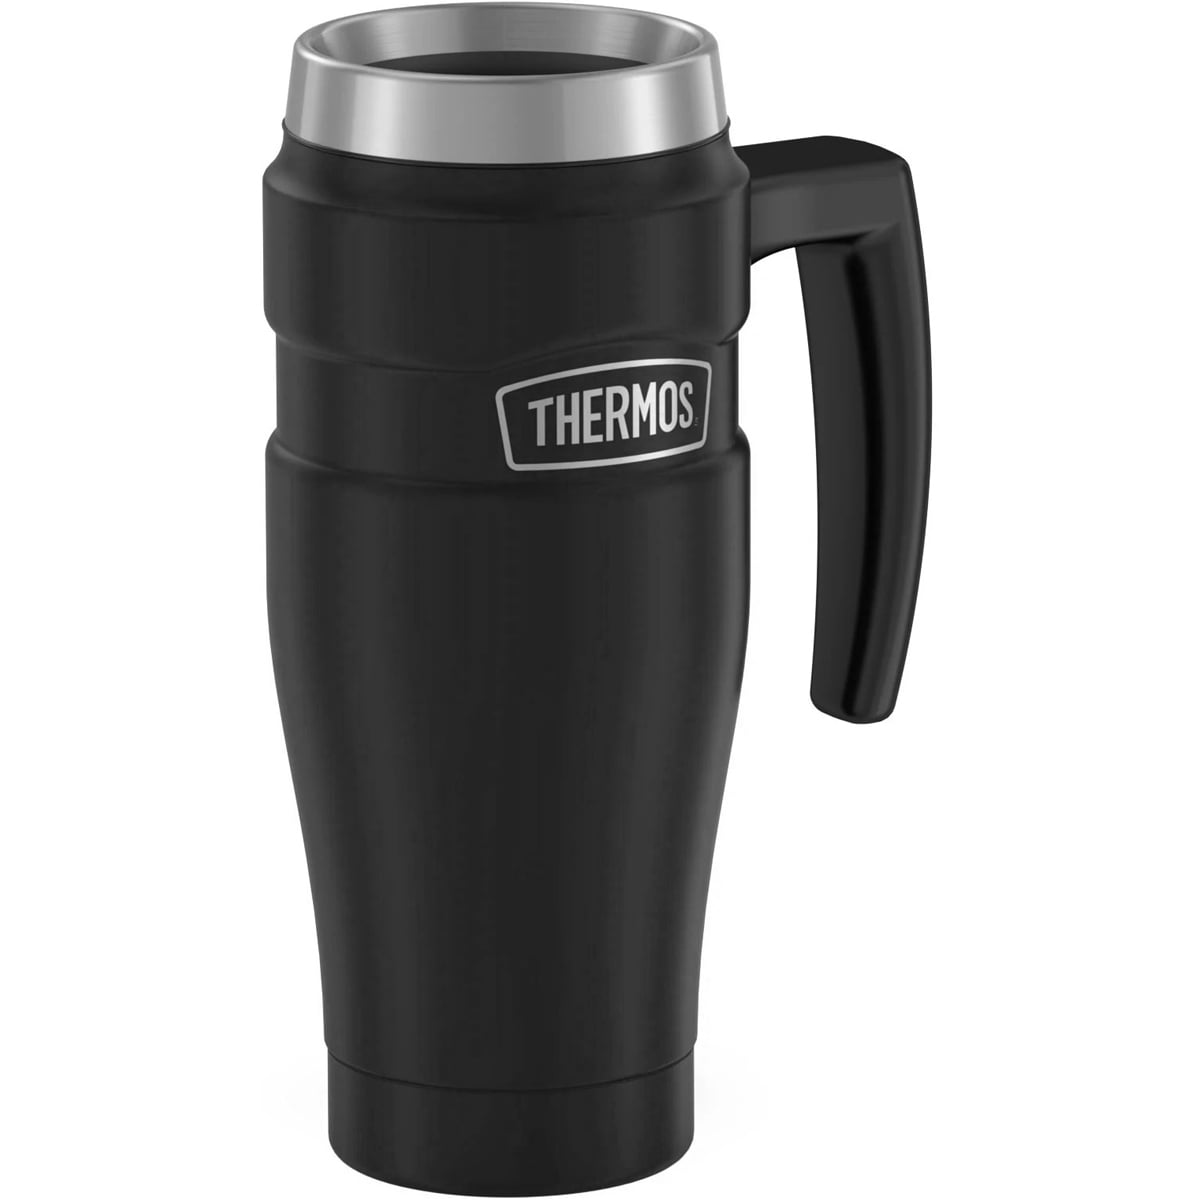 Thermos 16 oz. Stainless King Travel Mug with Handle - Matte Black 